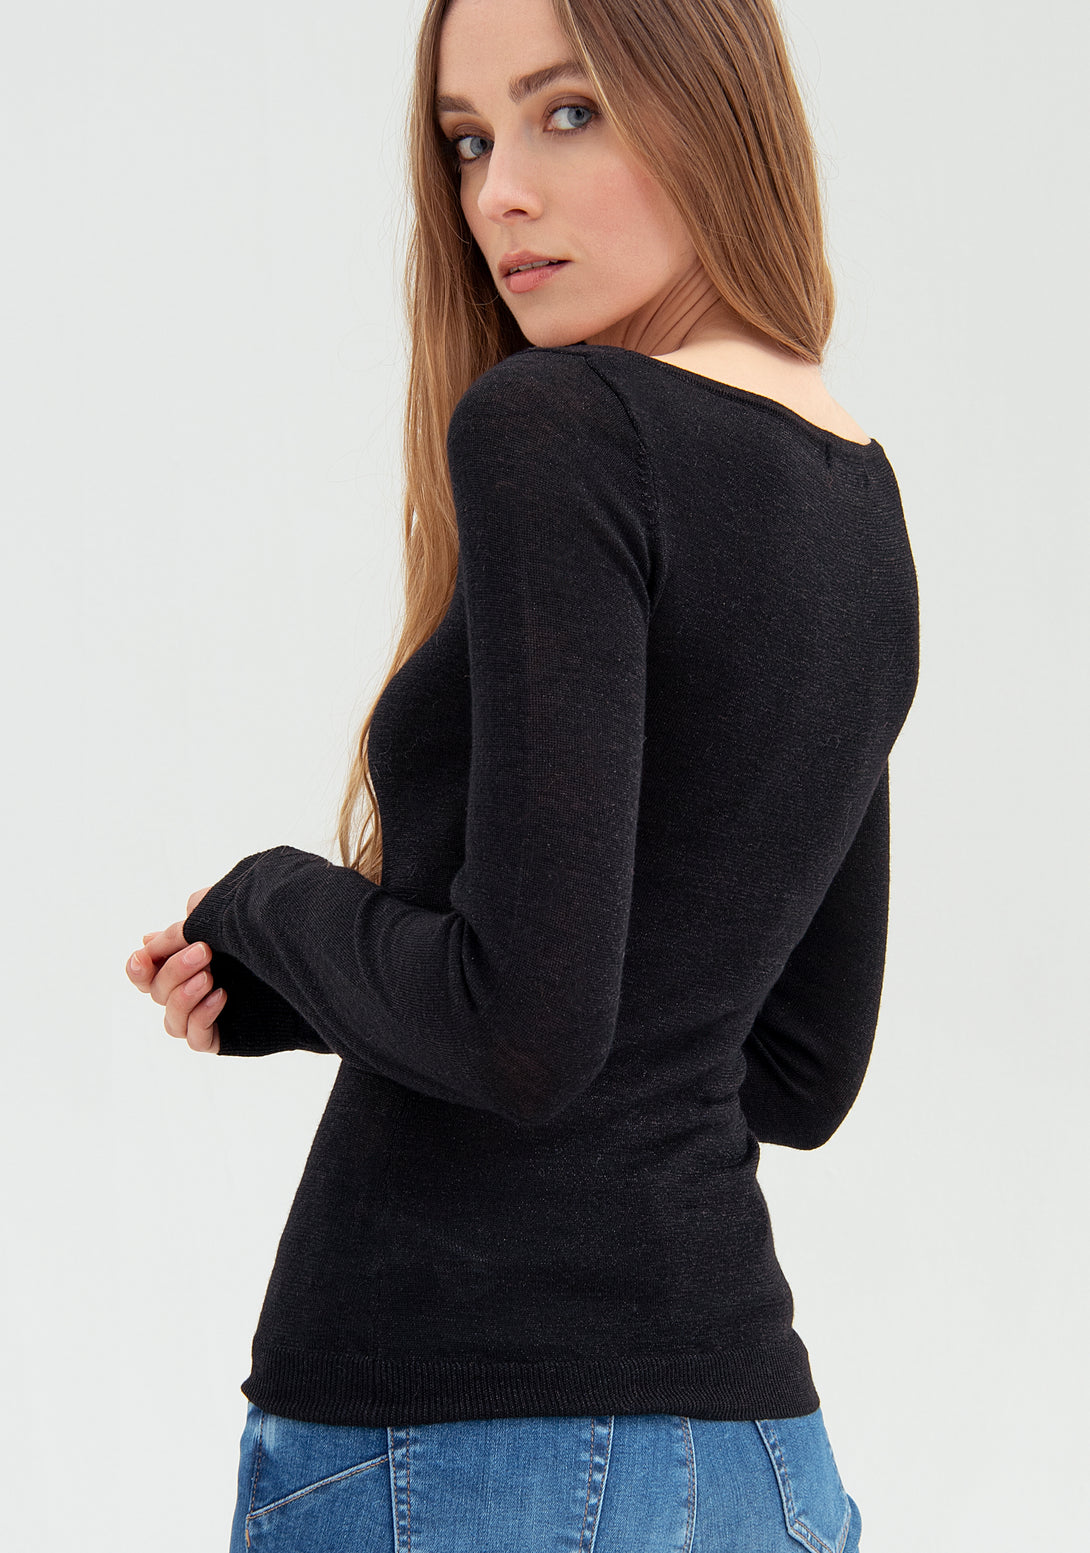 Knitwear tight fit made in viscose